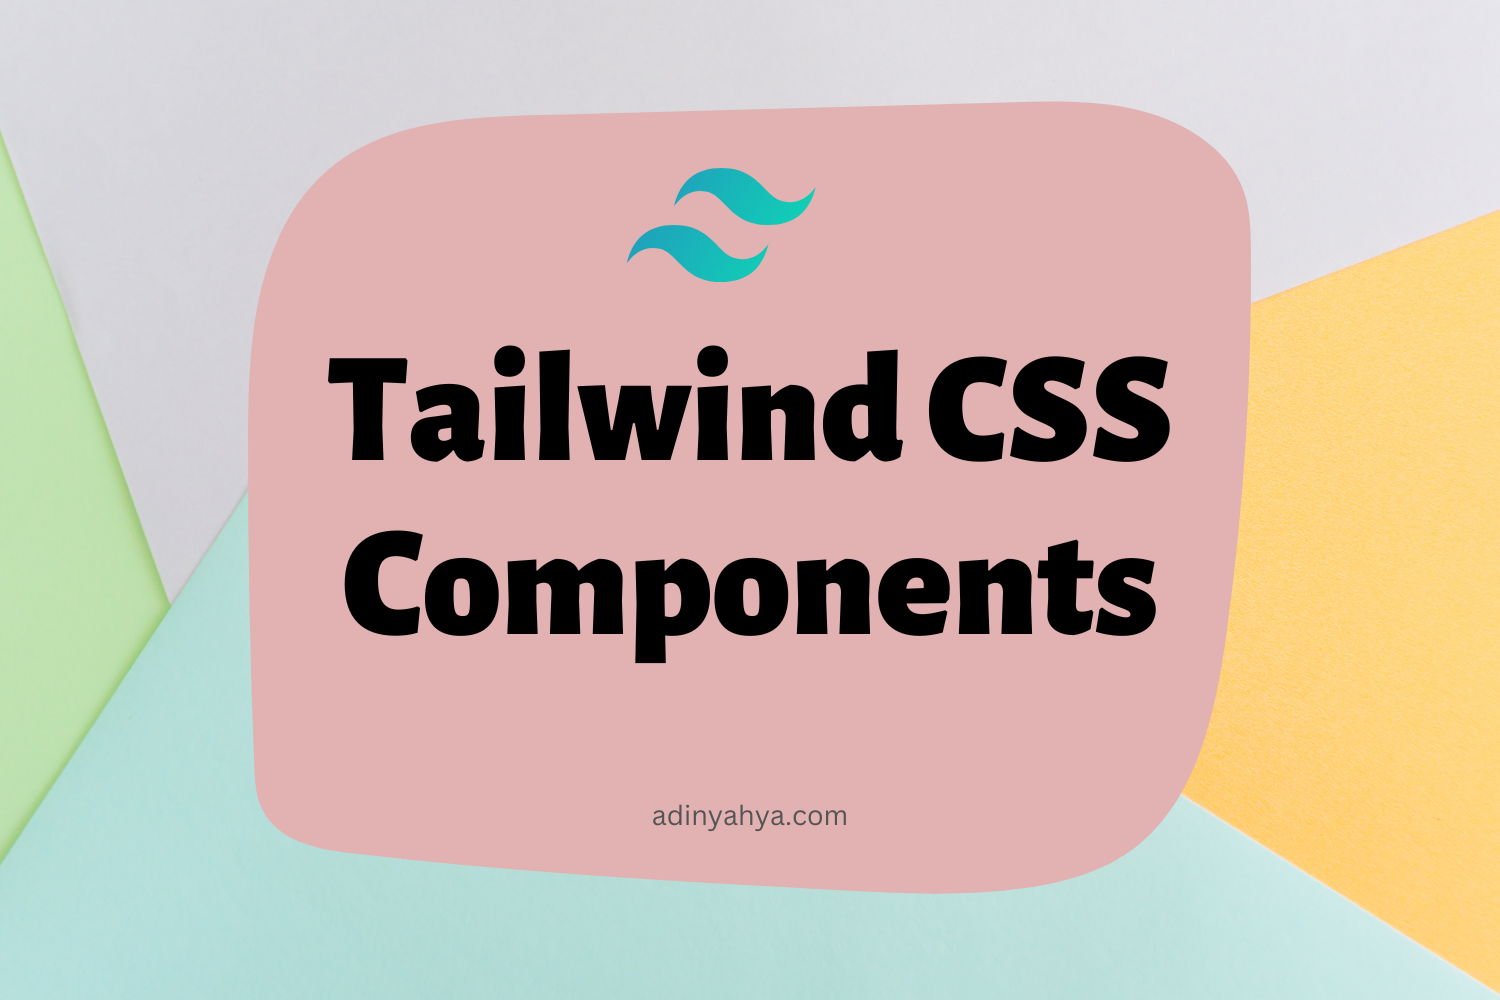 Tailwind CSS Components